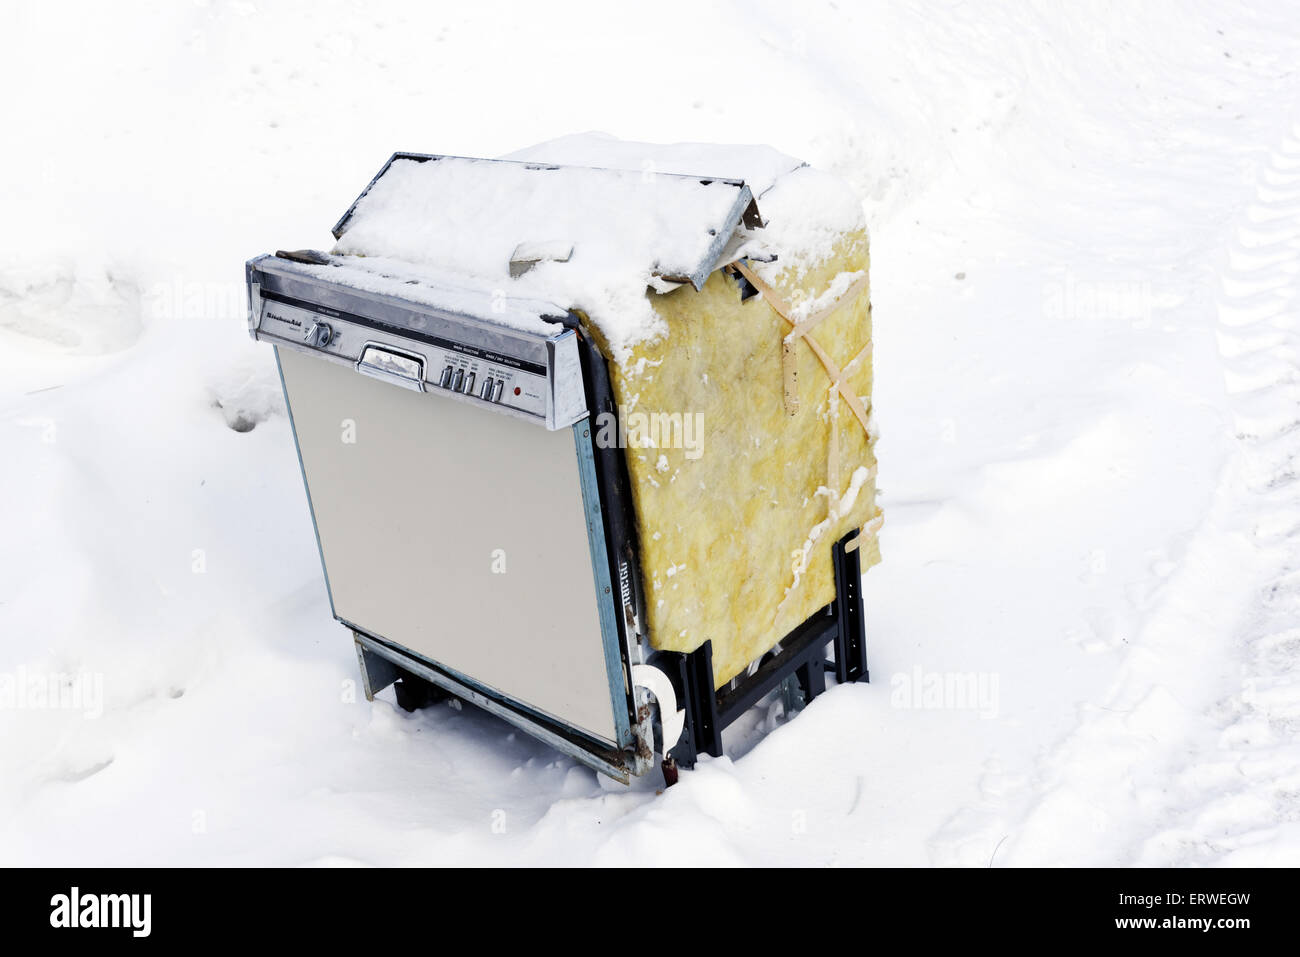 An old dishwasher dumped in the snow Stock Photo